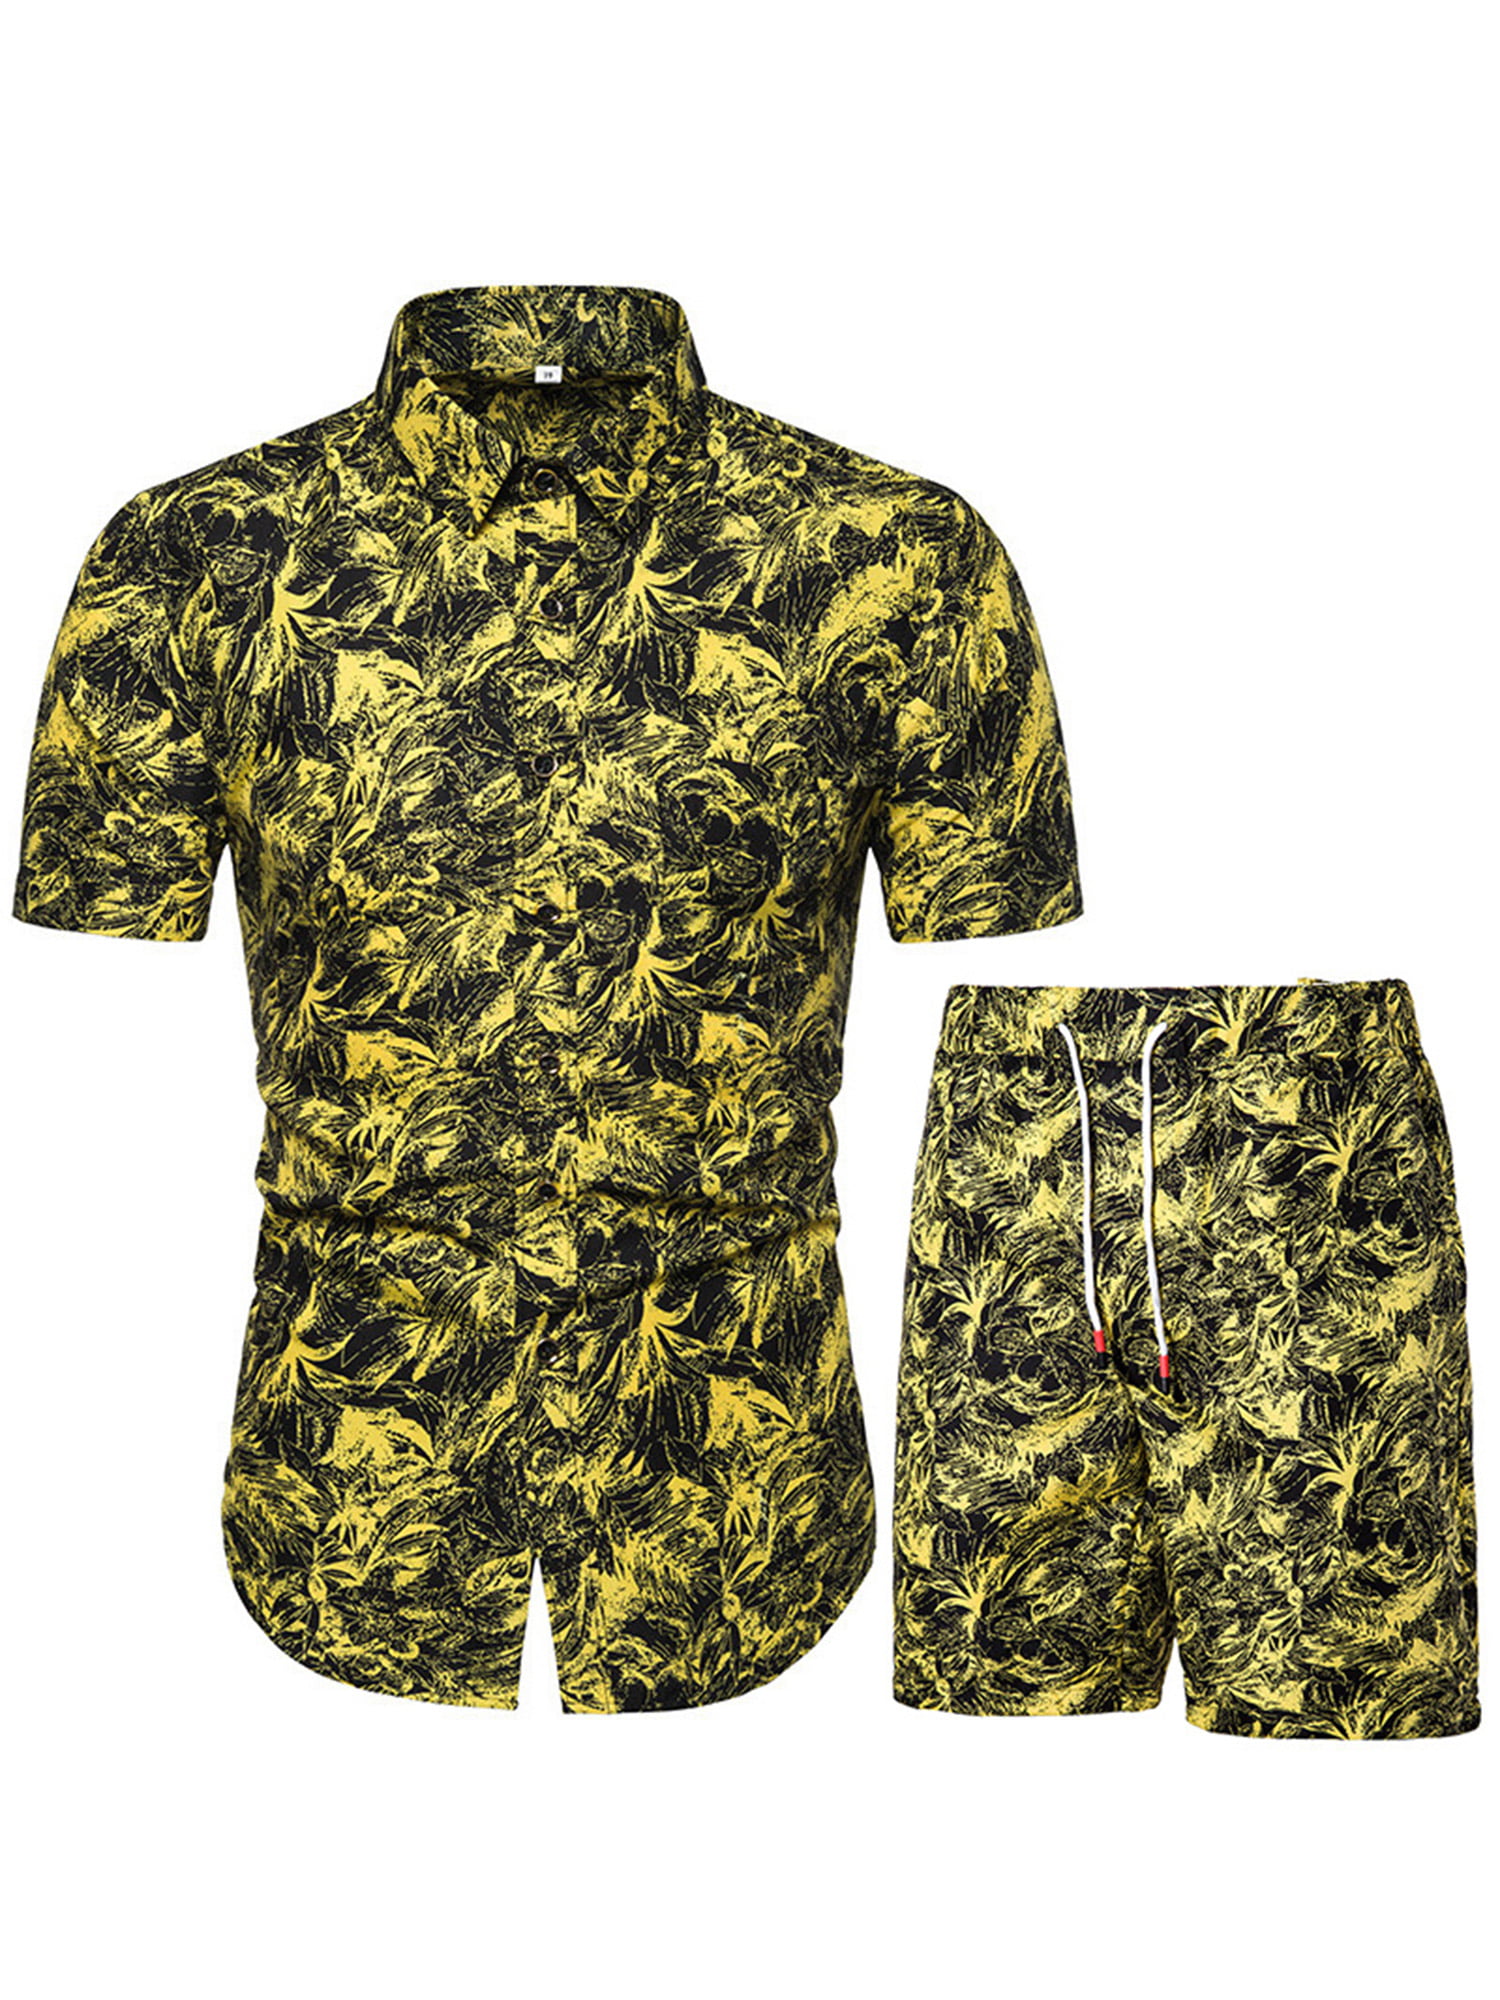 Outfit for Men F_Gotal Mens Hawaii Printed Half Sleeve Button-Dwon T Shirts Jogger Shorts Sets 2 Piece Tracksuits 